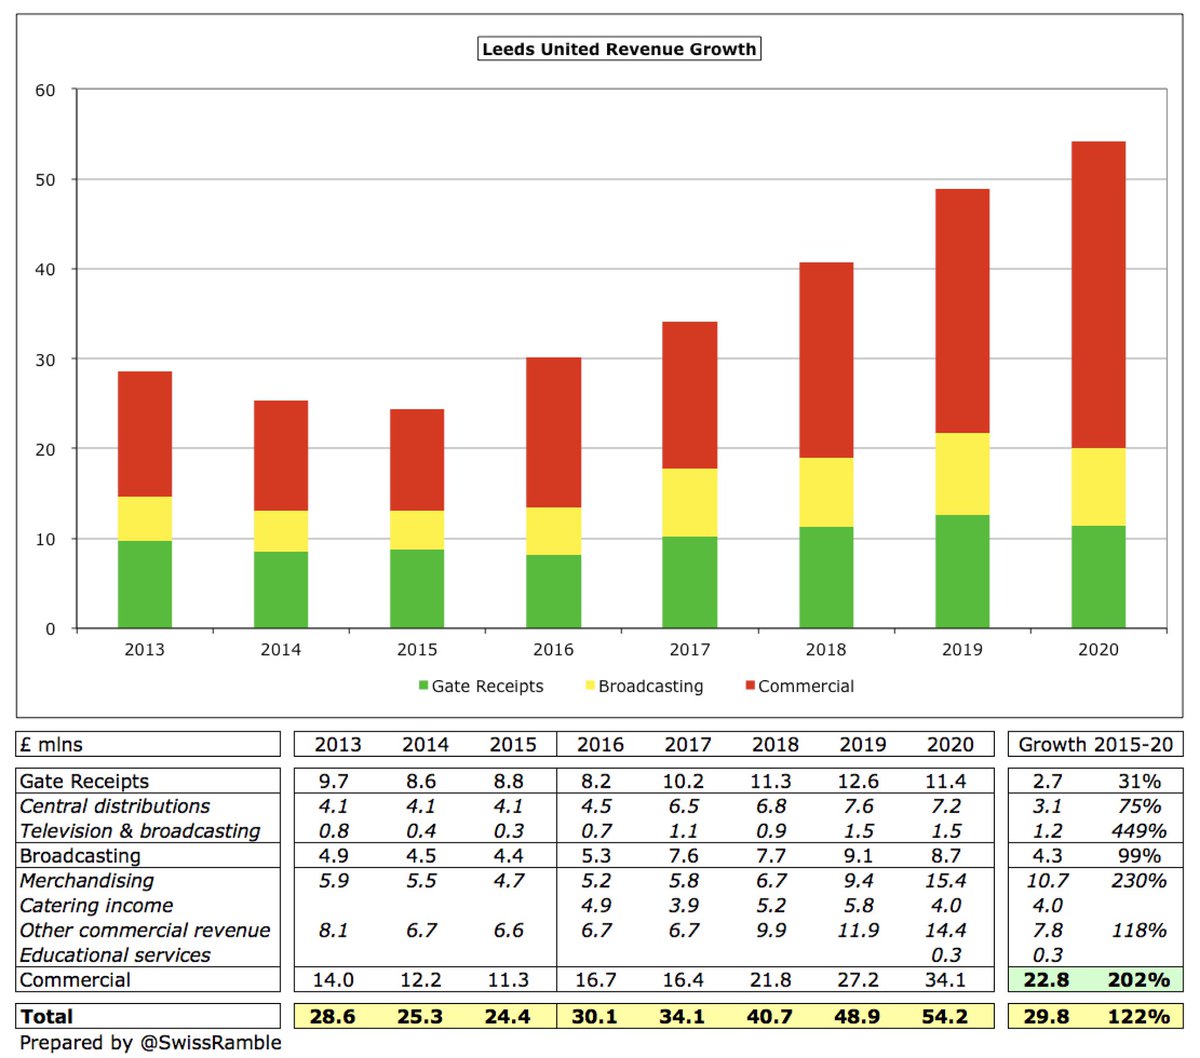  #LUFC revenue has more than doubled in the last 5 years from £24m to £54m, mainly driven by commercial, which has tripled from £11m to £34m, now contributing 63% of total revenue. The growth was partly due to bringing £4m catering back in-house.